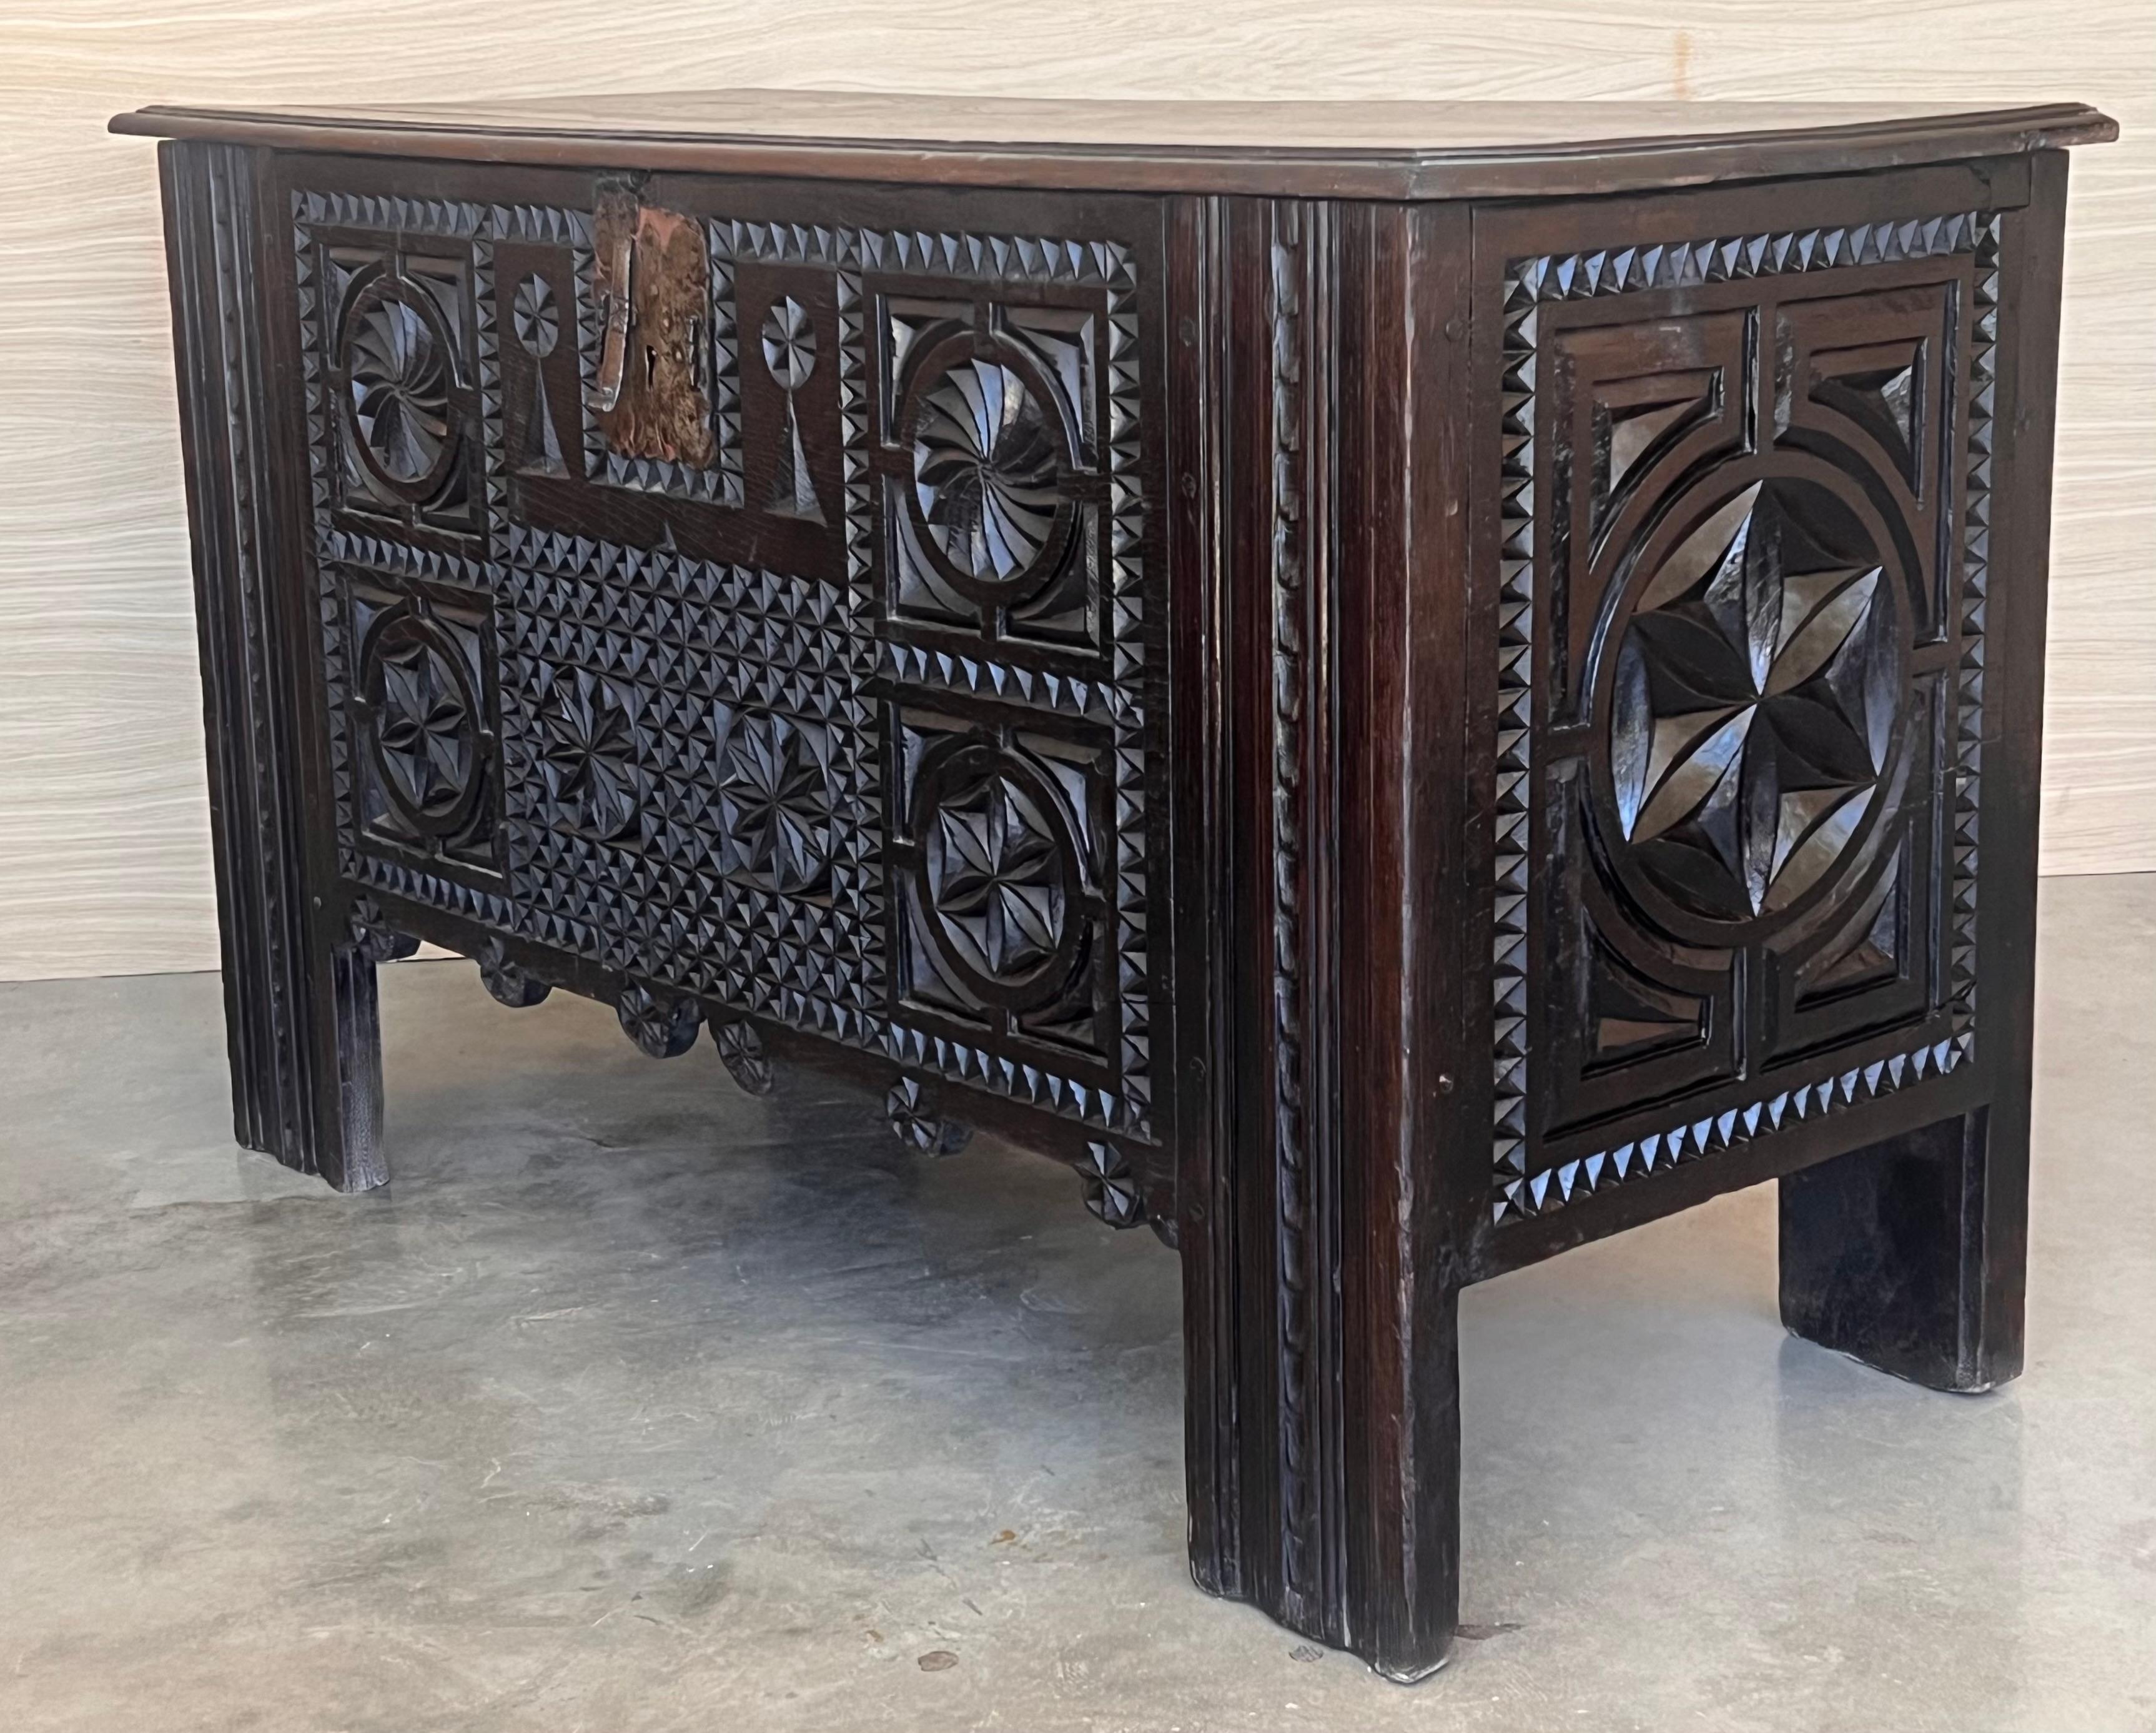 Spanish Antique Carved Walnut Large Kutxa Trunk from the Basque Country, Early 1800s For Sale